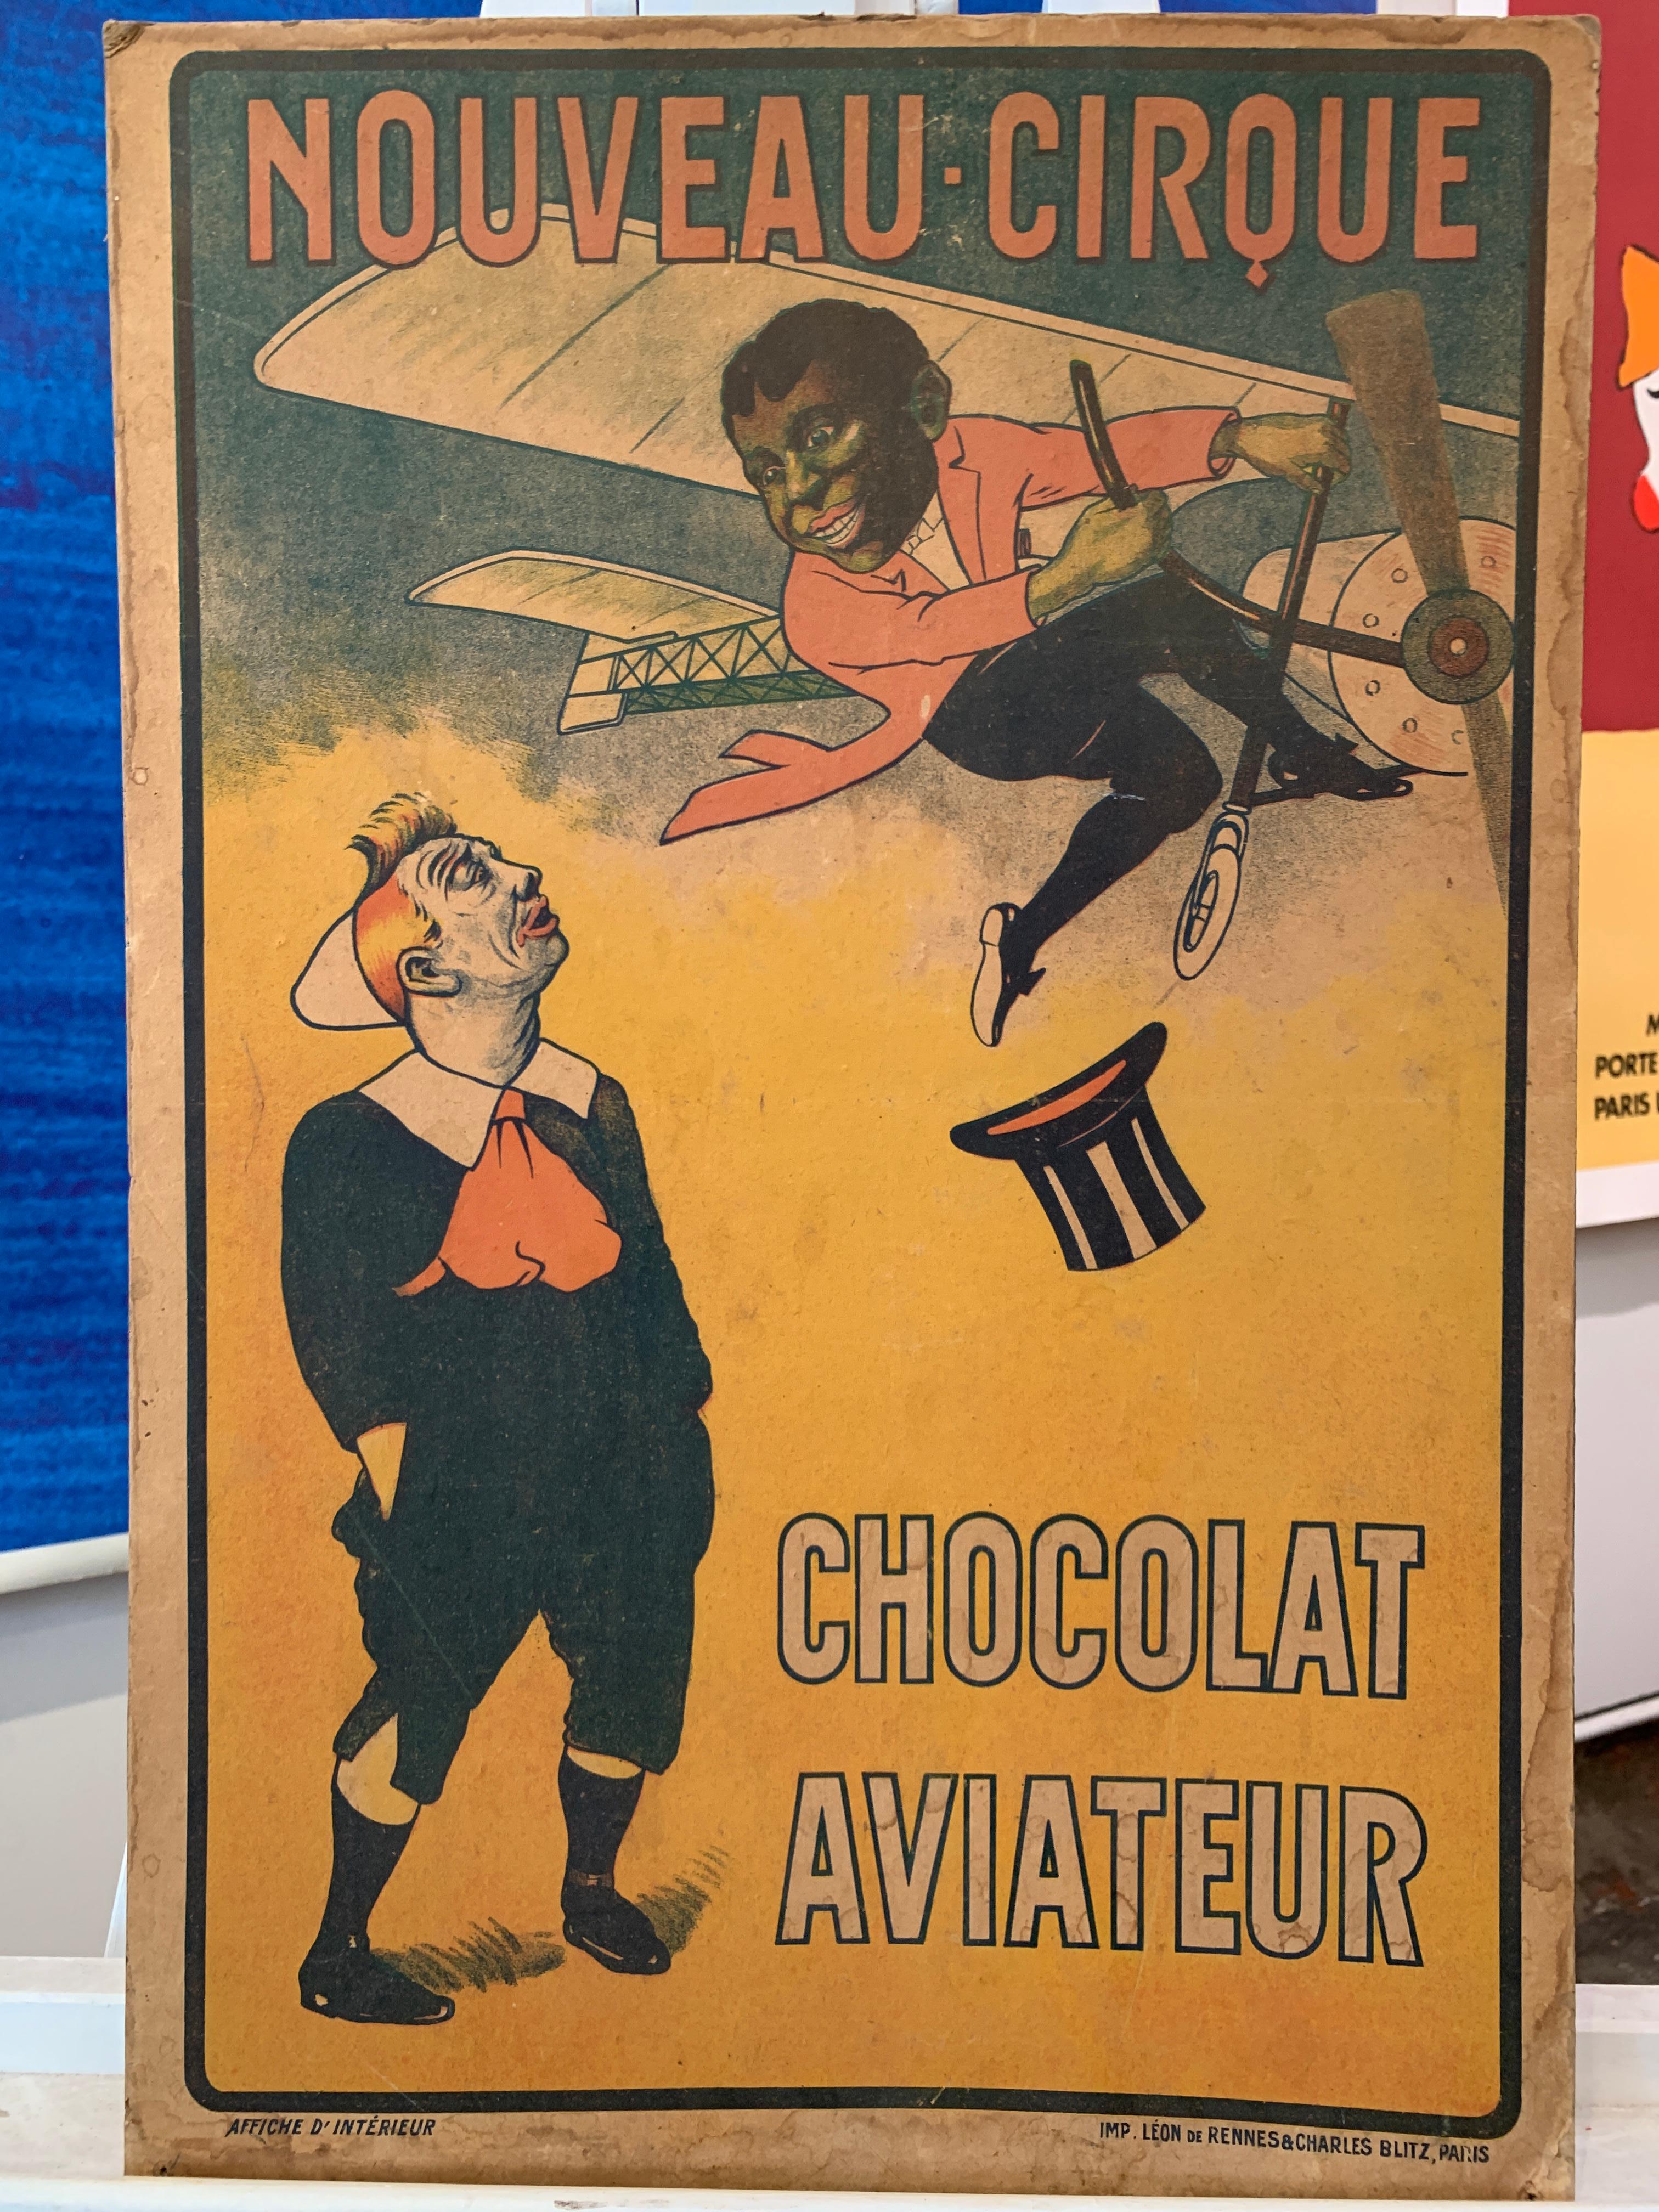 Foottit (often misspelled Footit) and Chocolat were a circus duo who made their debut in the late 1890's in Paris. The unlikely pair worked together as professional clowns in the 'Nouveau Cirque'. This original poster is advertising the circus that